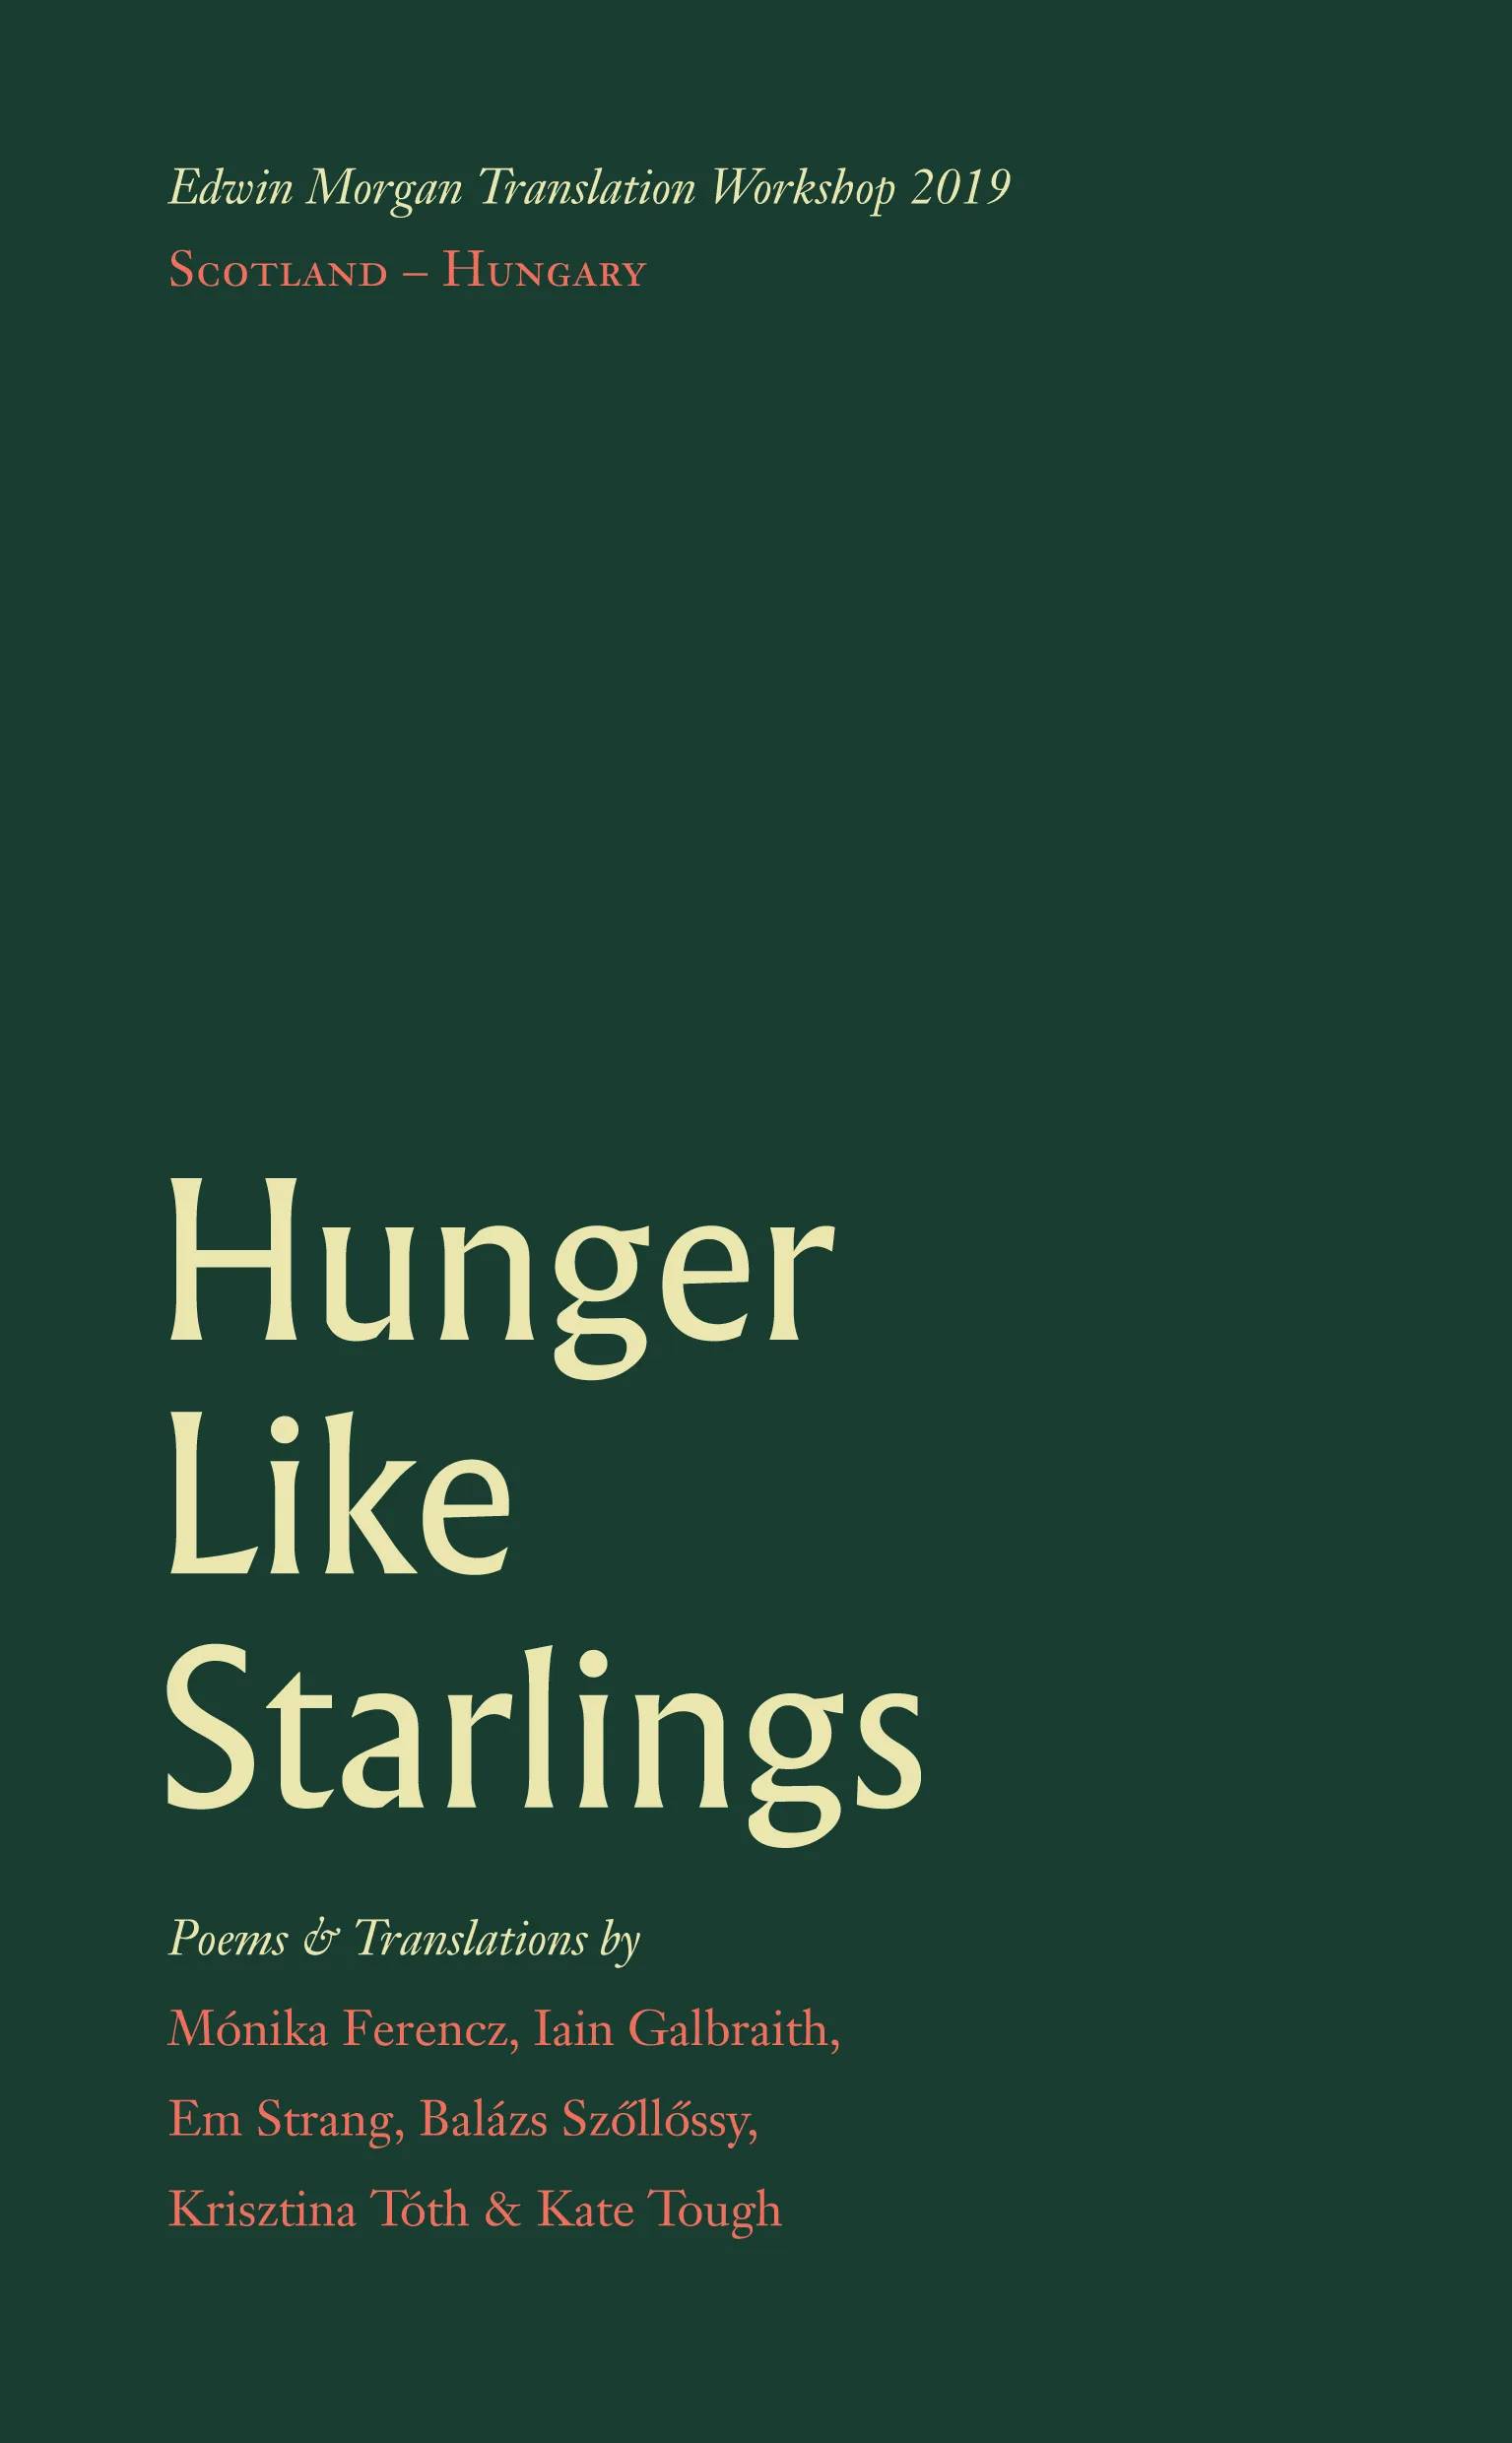 Featured image of Hunger Like Starlings